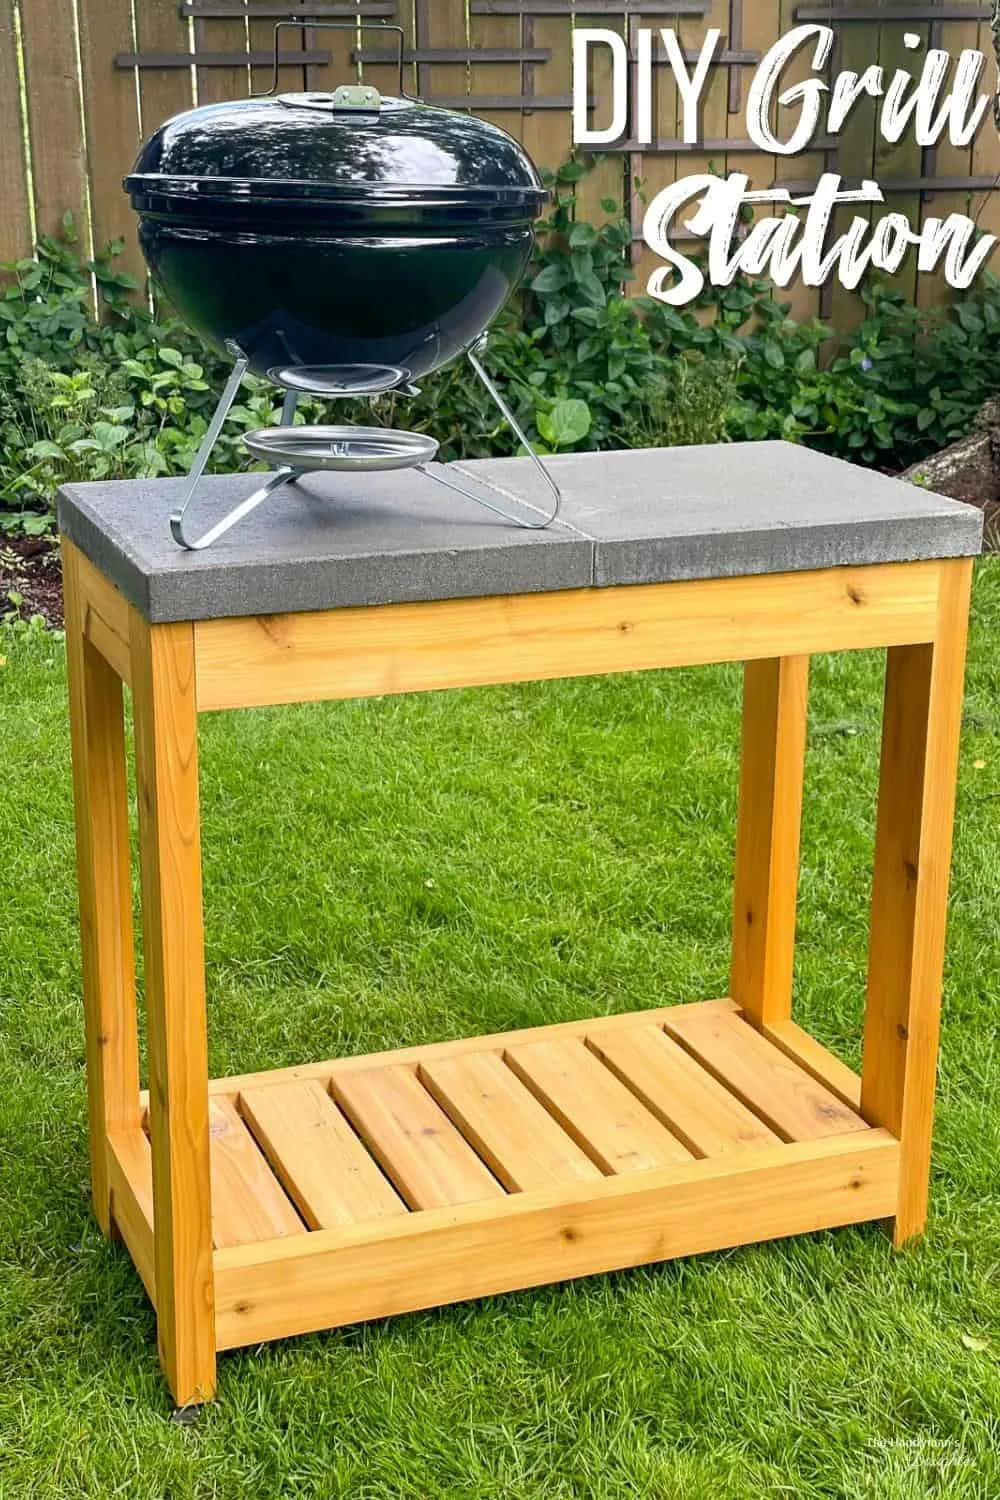 Grill Stand Fit for a Woodworker - Fine Woodworking